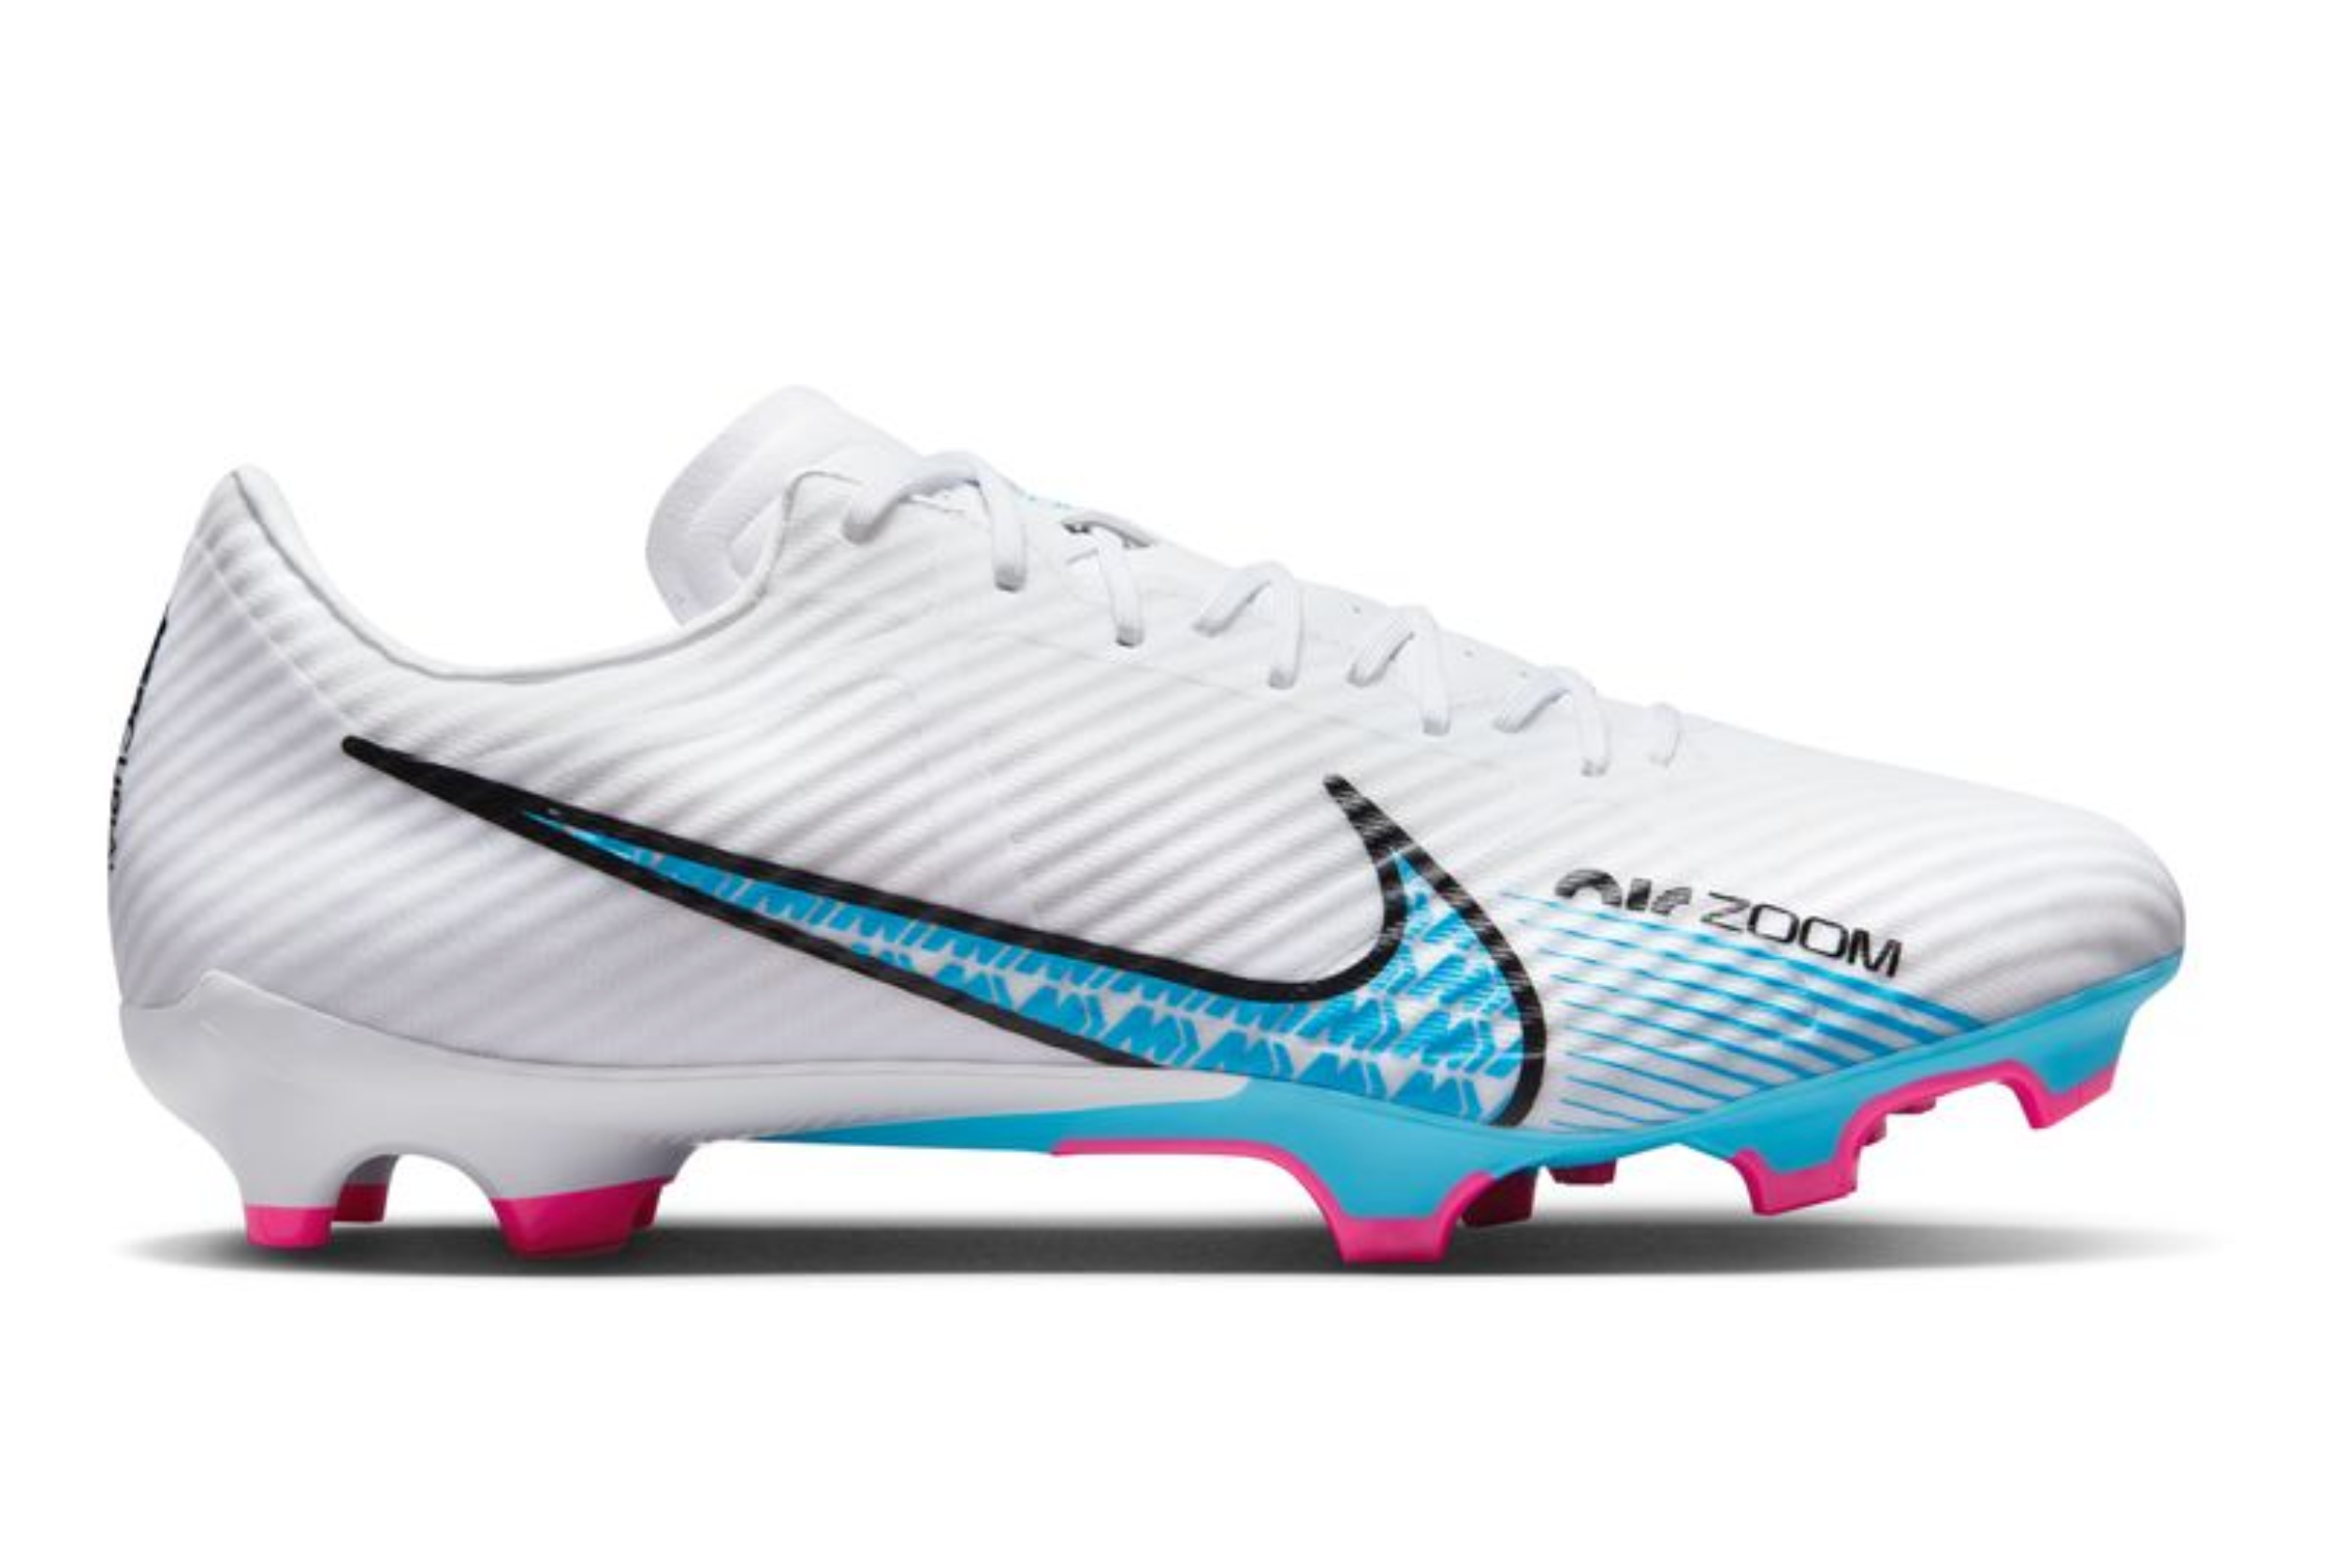 Nike Air Zoom Mercurial Vapor 15 Academy Soccer Cleat - White/Blue/Black/Hot Punch DJ5631-146 – Soccer Zone USA